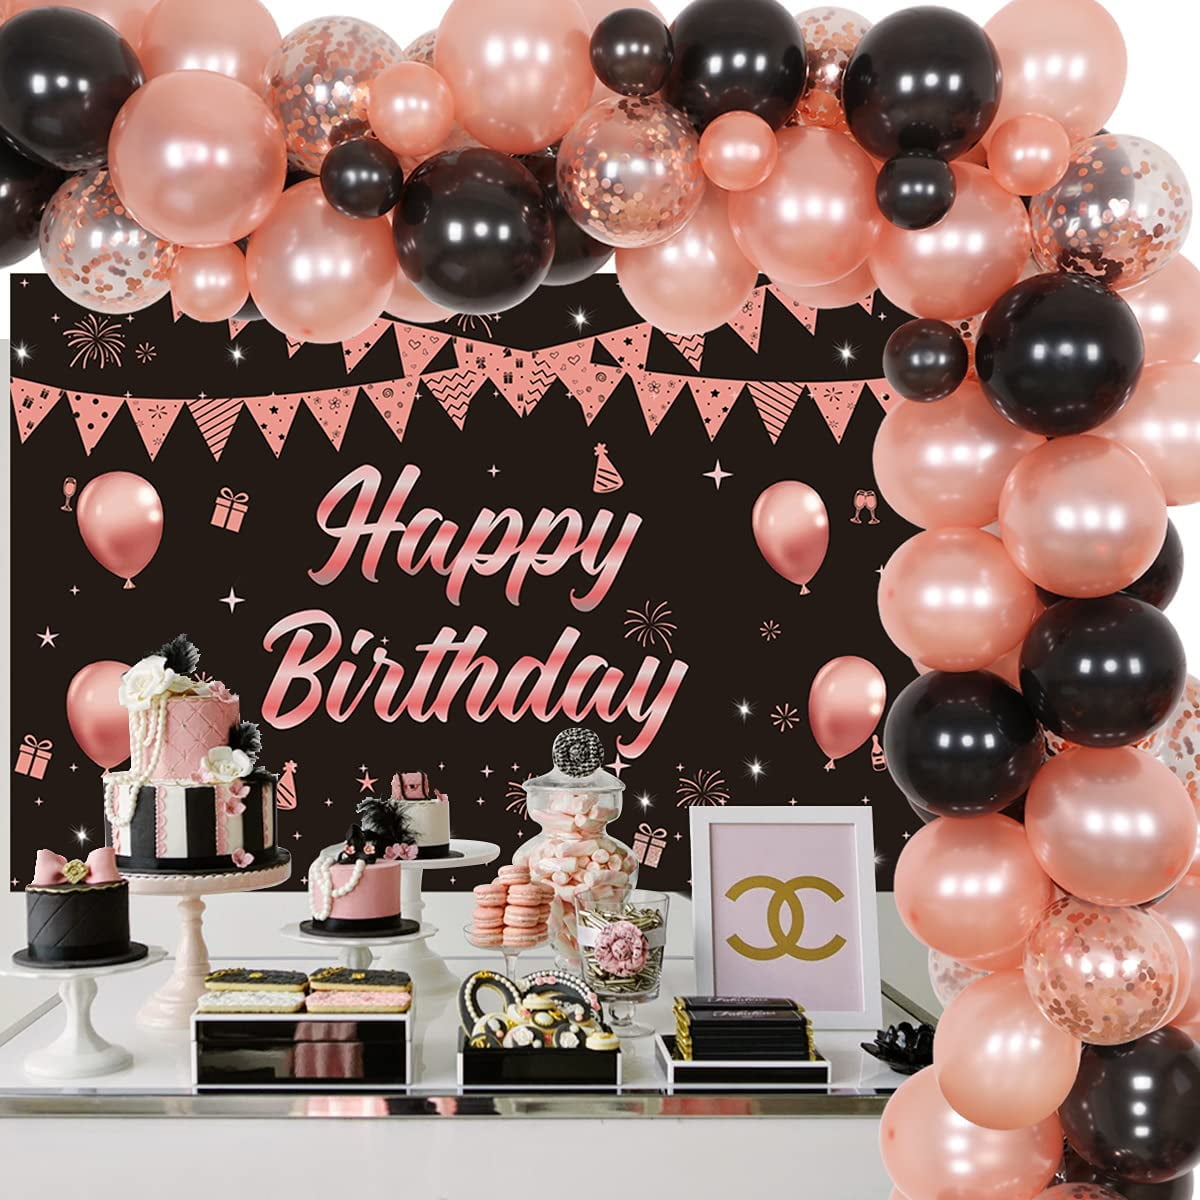 Black and Rose Gold Birthday Decorations - Rose Gold Black Balloon Garland  Kit Happy Birthday Backdrop for Women Girls Sweet 16th/18th/30th/40th/50th Birthday  Party Supplies 